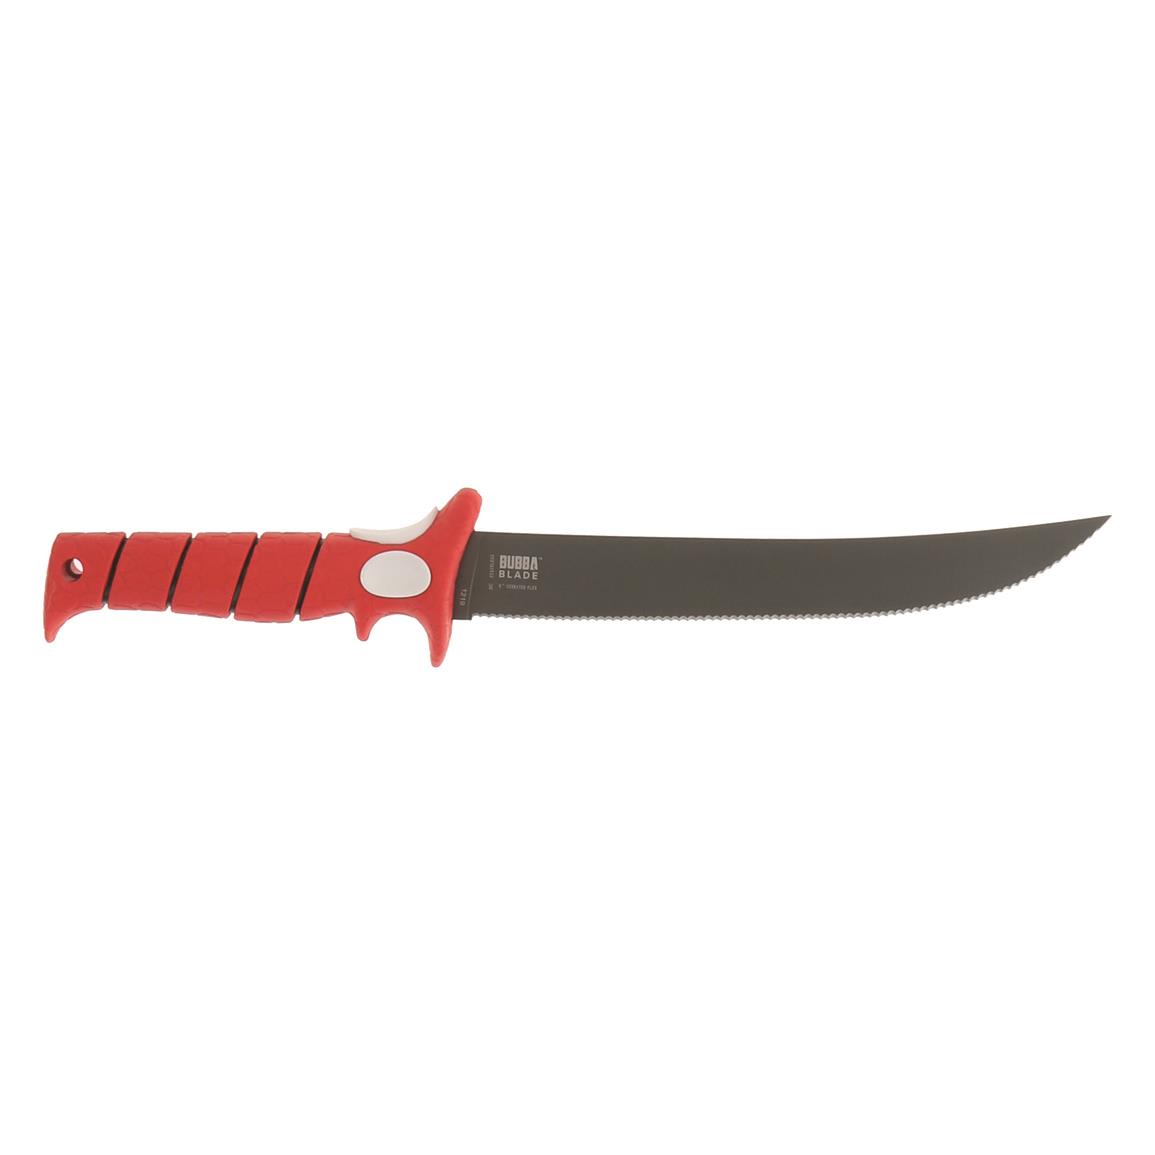 Bubba Proteus Ulu Knife - 720287, Fillet Knives at Sportsman's Guide